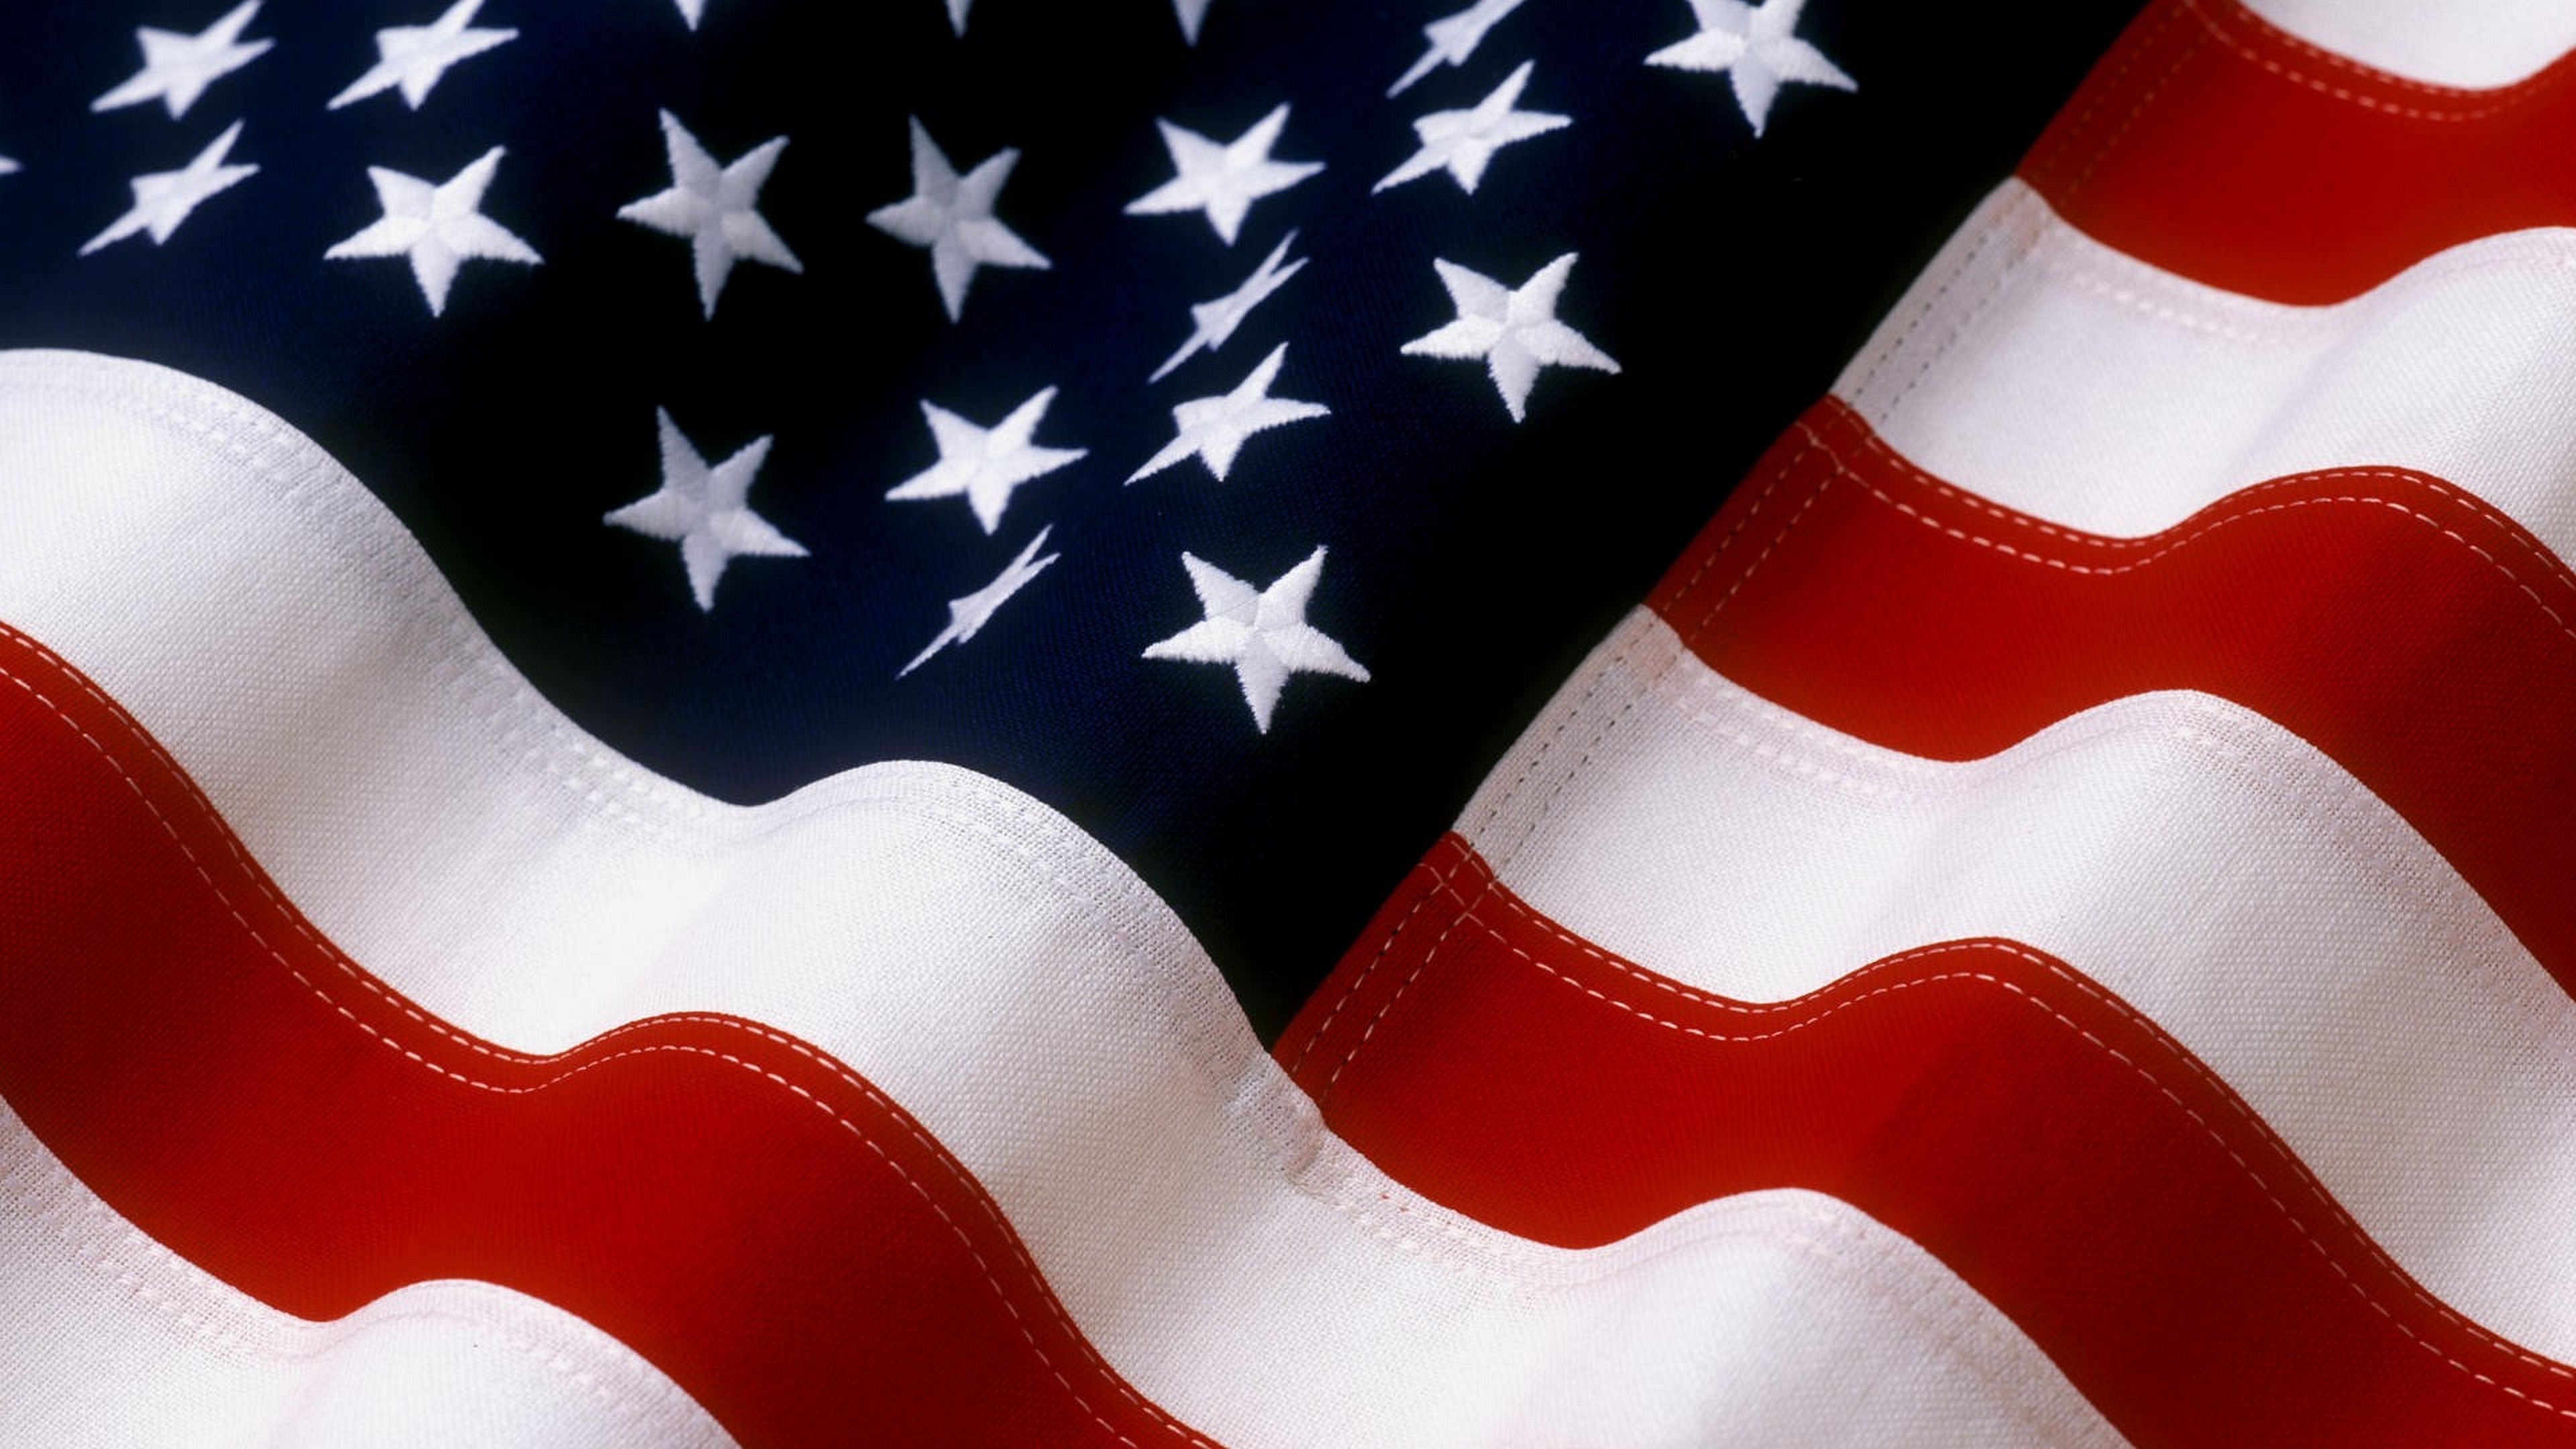 3840x2160 Download American Flag Background pictures in high definition or .